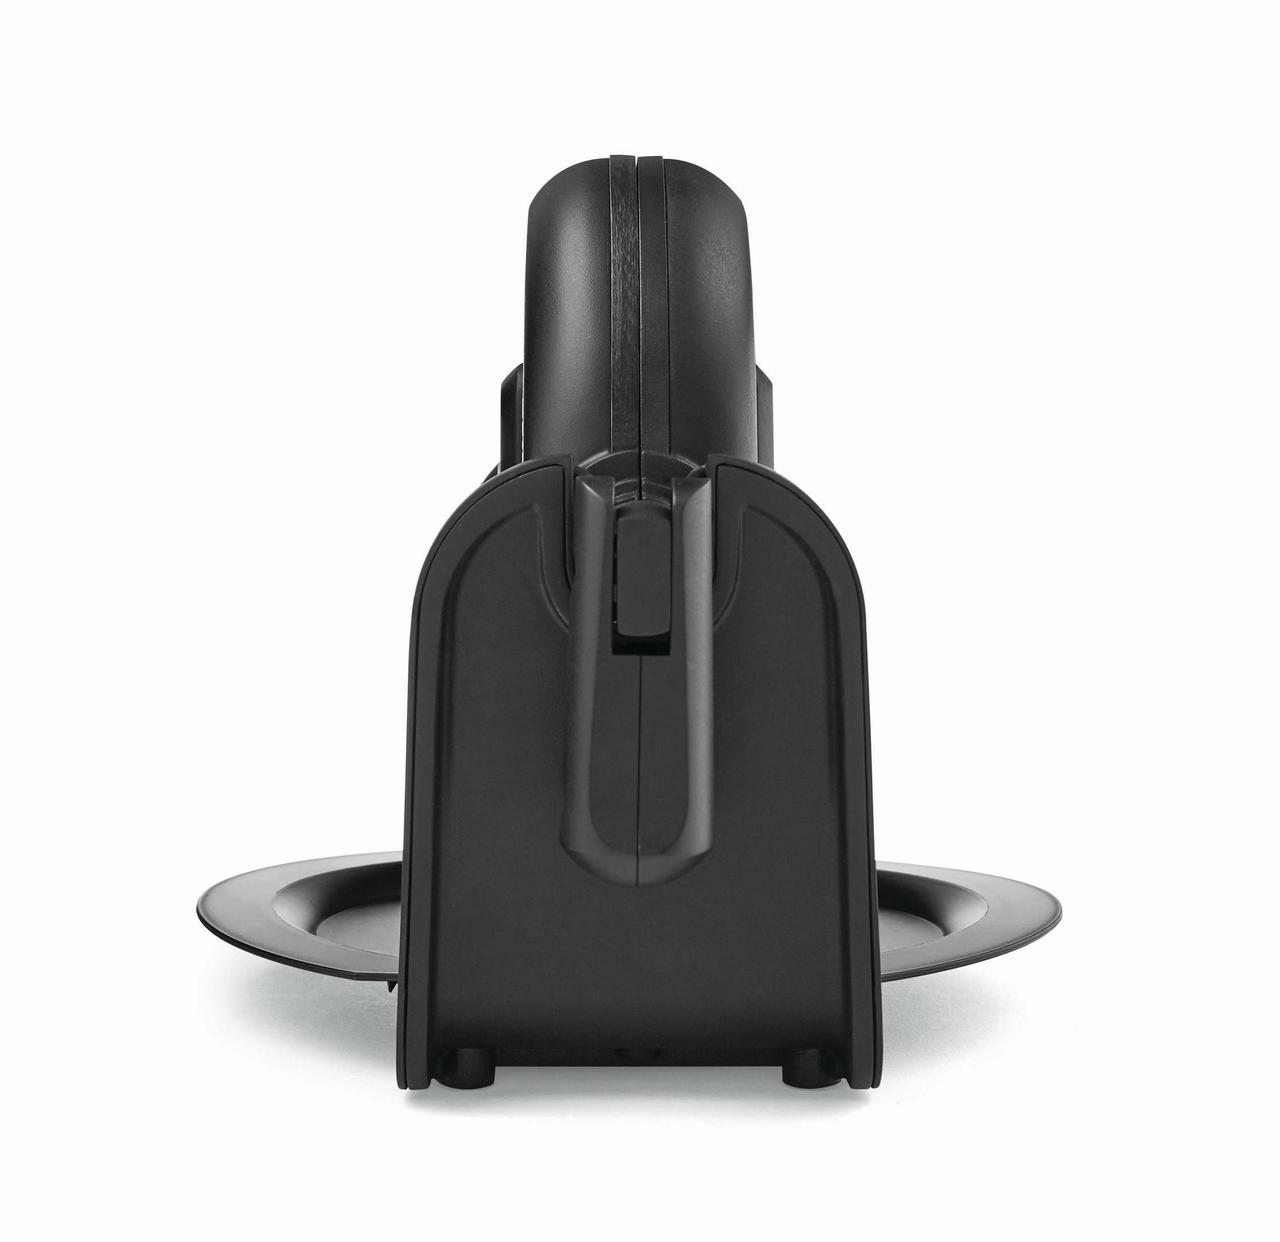 Farberware Single-Flip Waffle Maker, Black with Stainless Steel Decoration - image 3 of 6